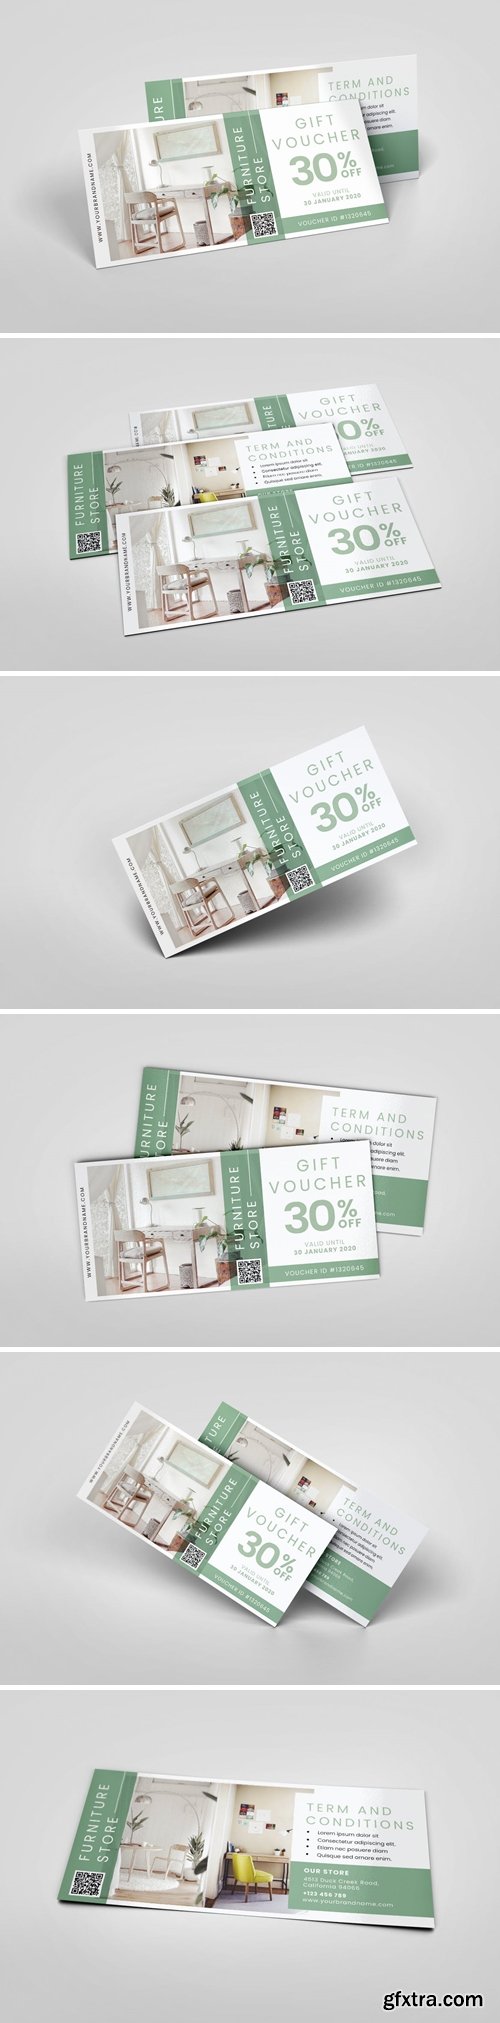 Furniture Store AI and PSD Gift Voucher Template